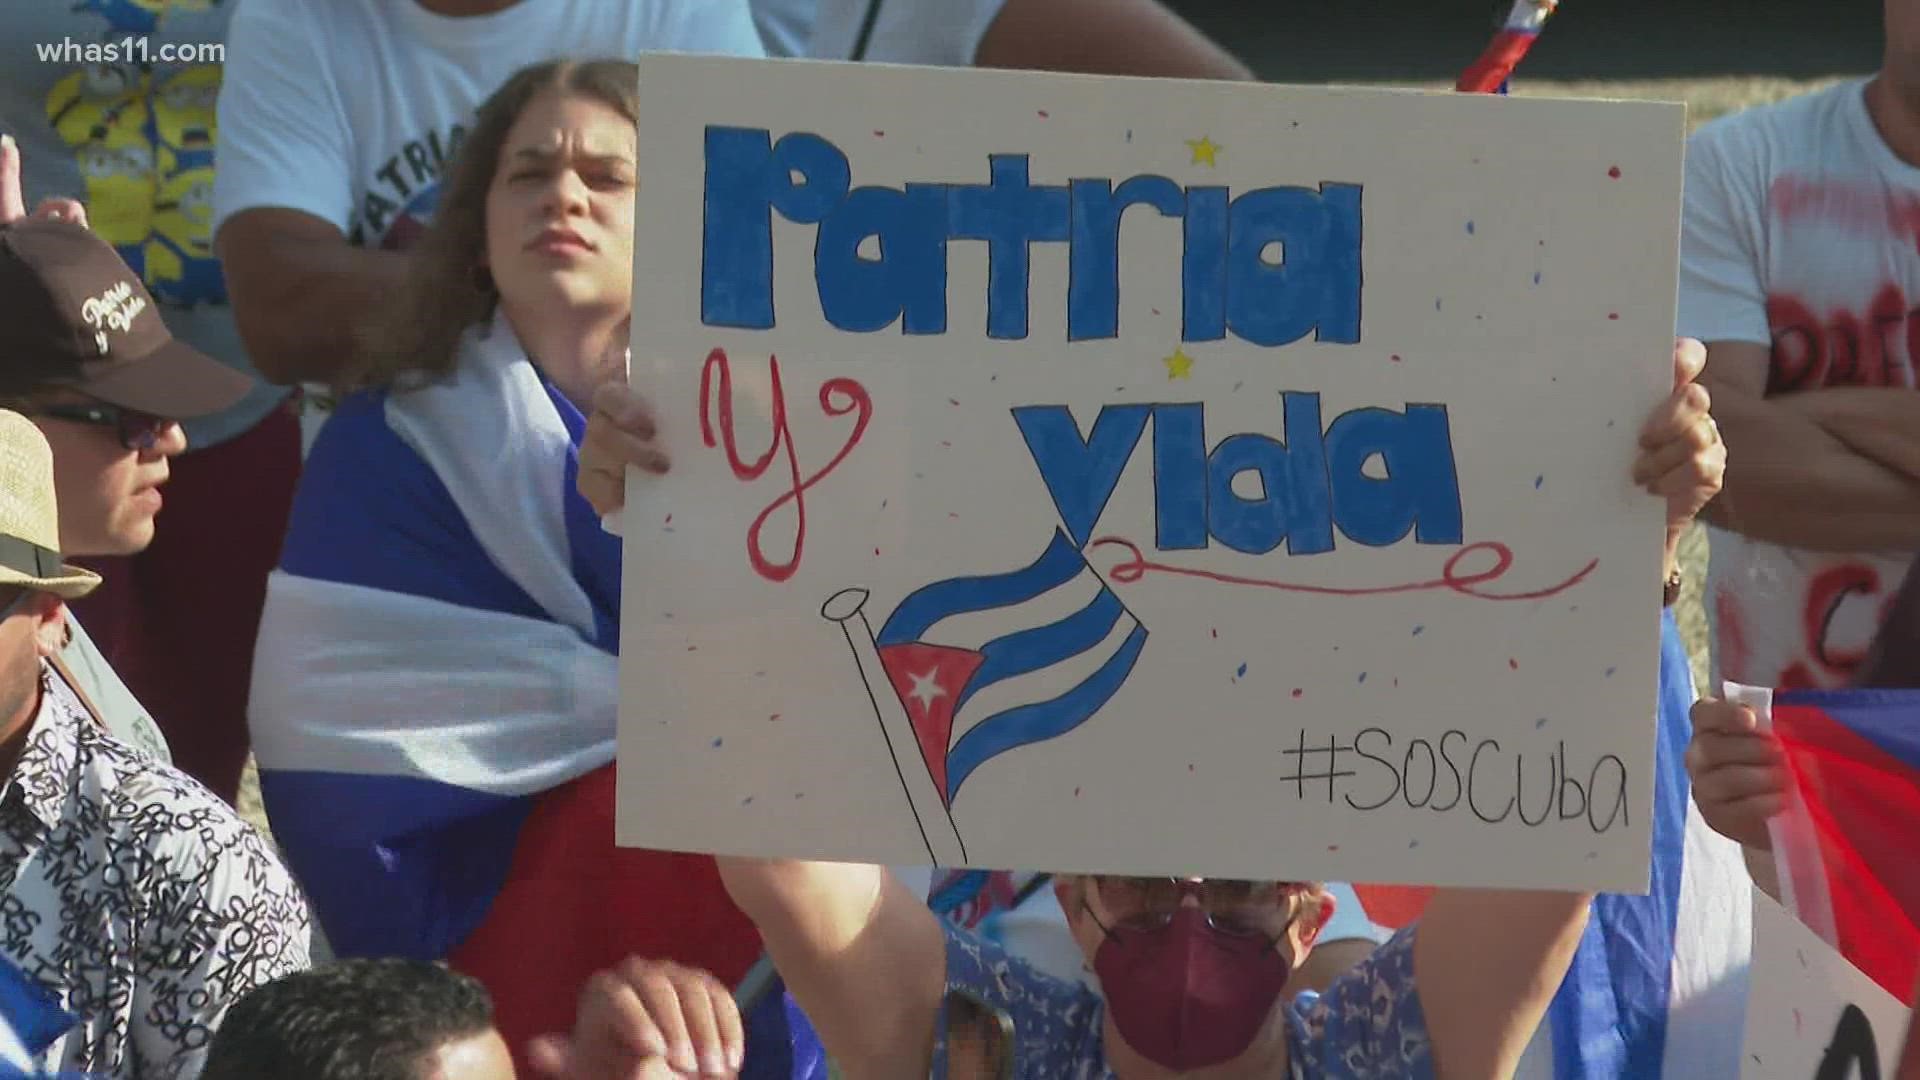 Cuban Americans held a rally in downtown Louisville, calling out Cuba for poor living conditions, blackouts and shortages of food and medicine.